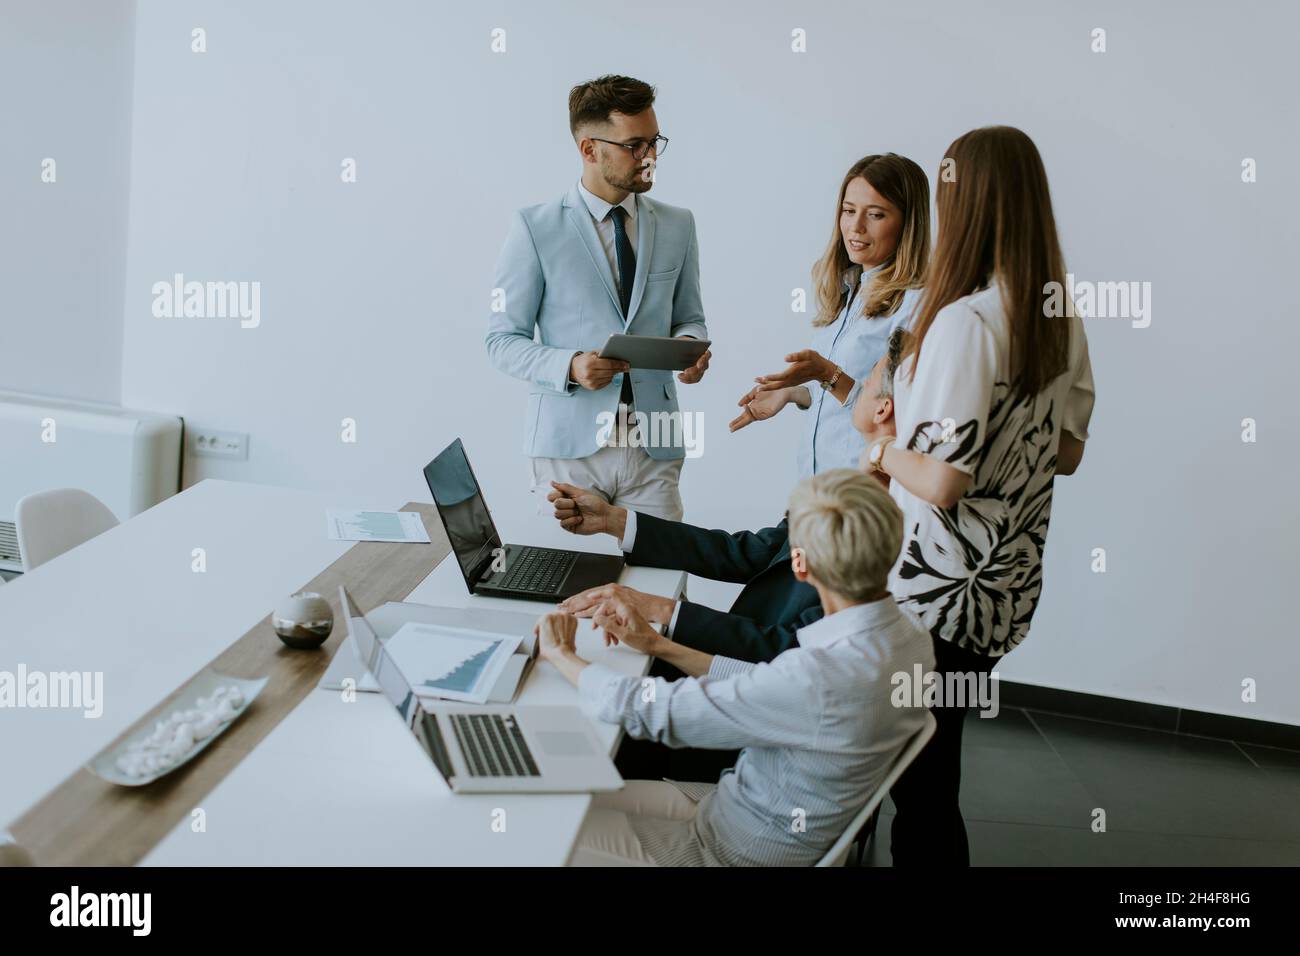 View at group of business people working together and preparing new project on a meeting in the office Stock Photo